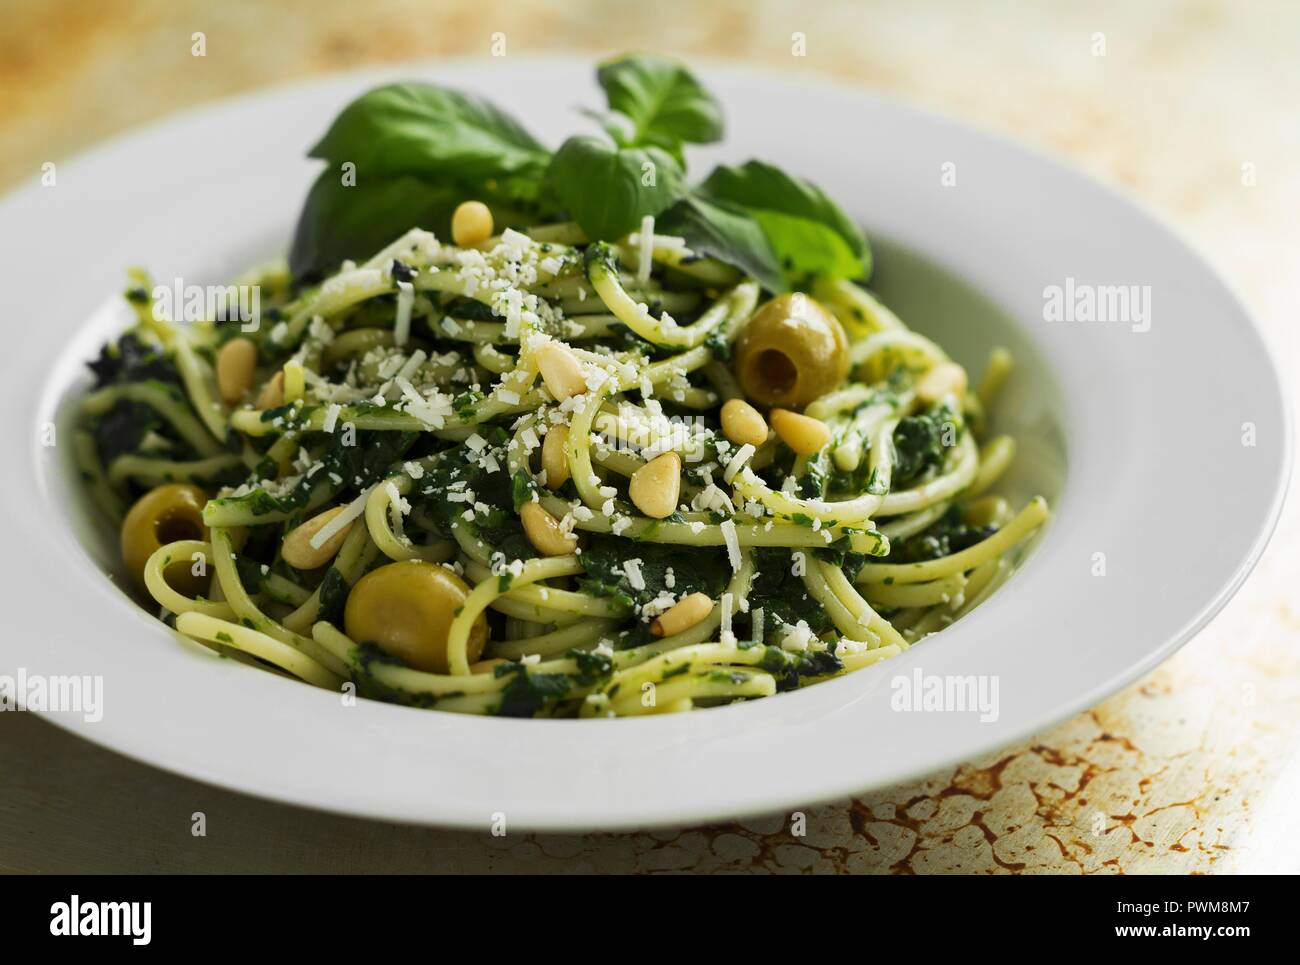 Spaghetti with spinach pesto and green olives Stock Photo